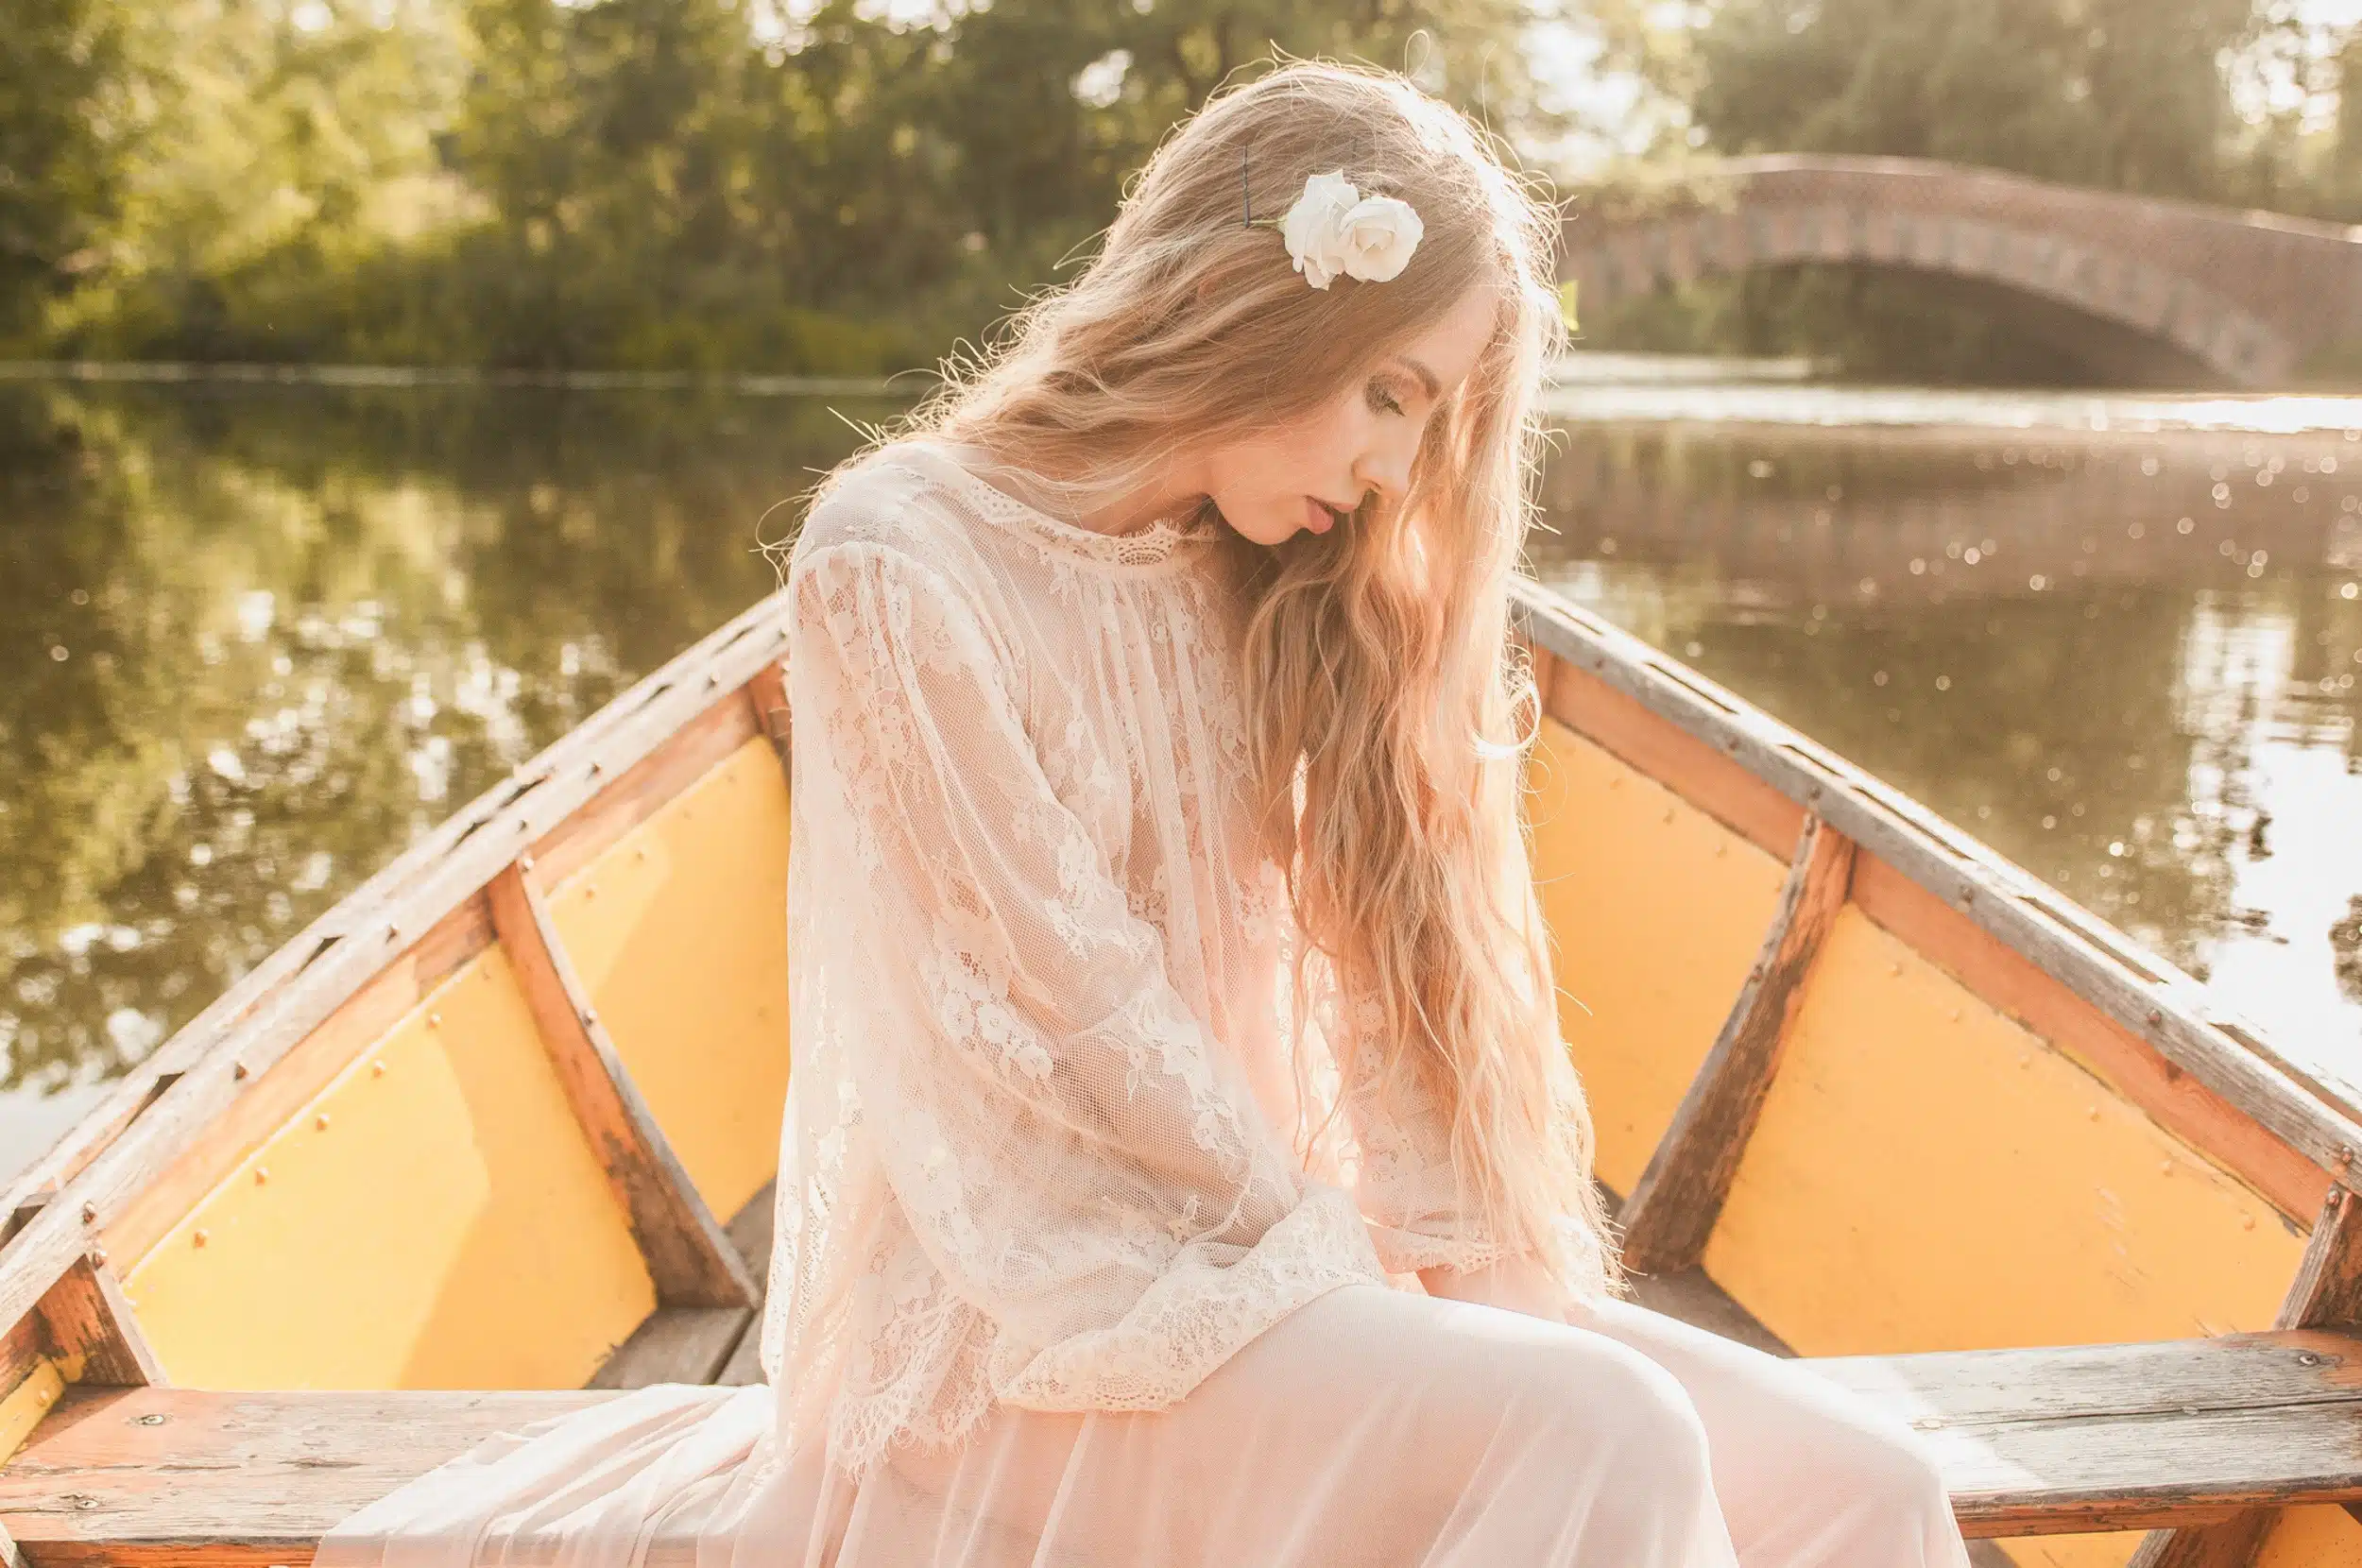 Enchanting melancholic woman in dress alone on a paddle boat.